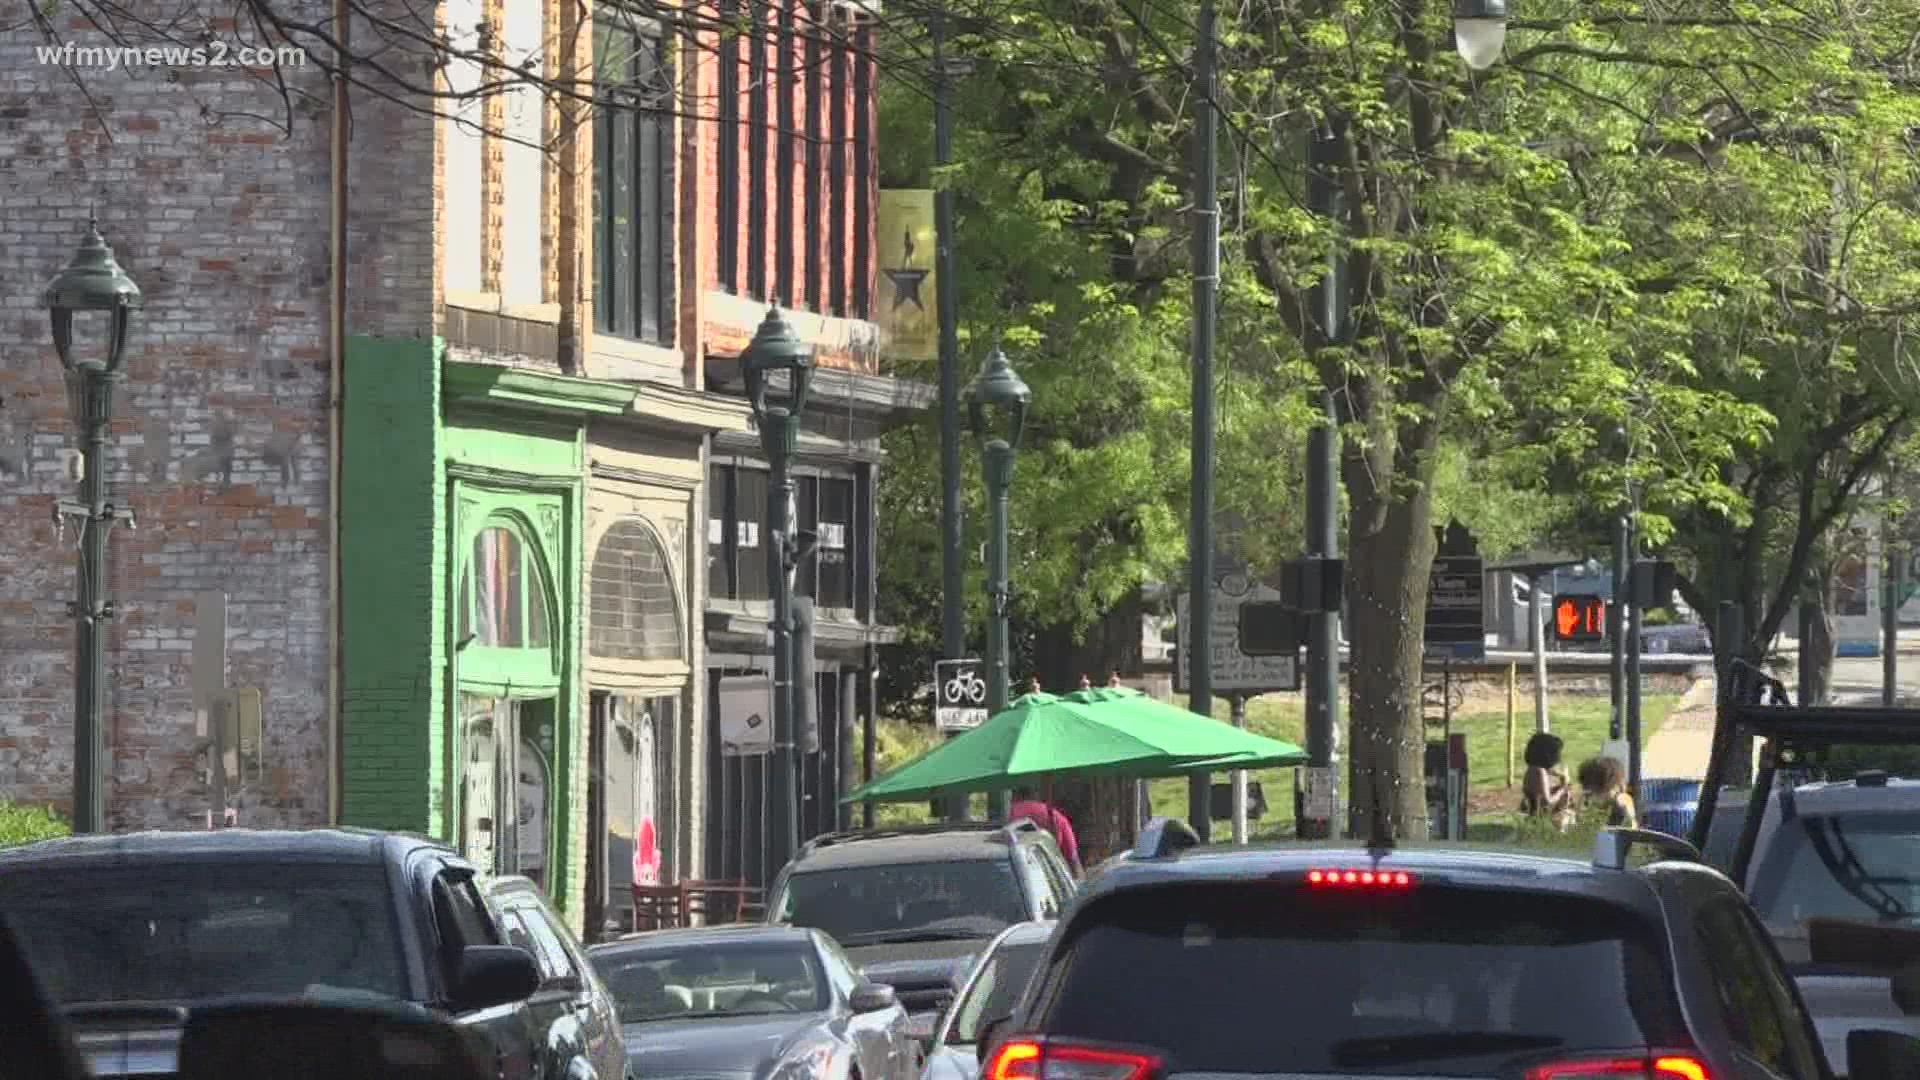 Greensboro keeps growing and business owners kept looking for spots to capitalize on all the activity.